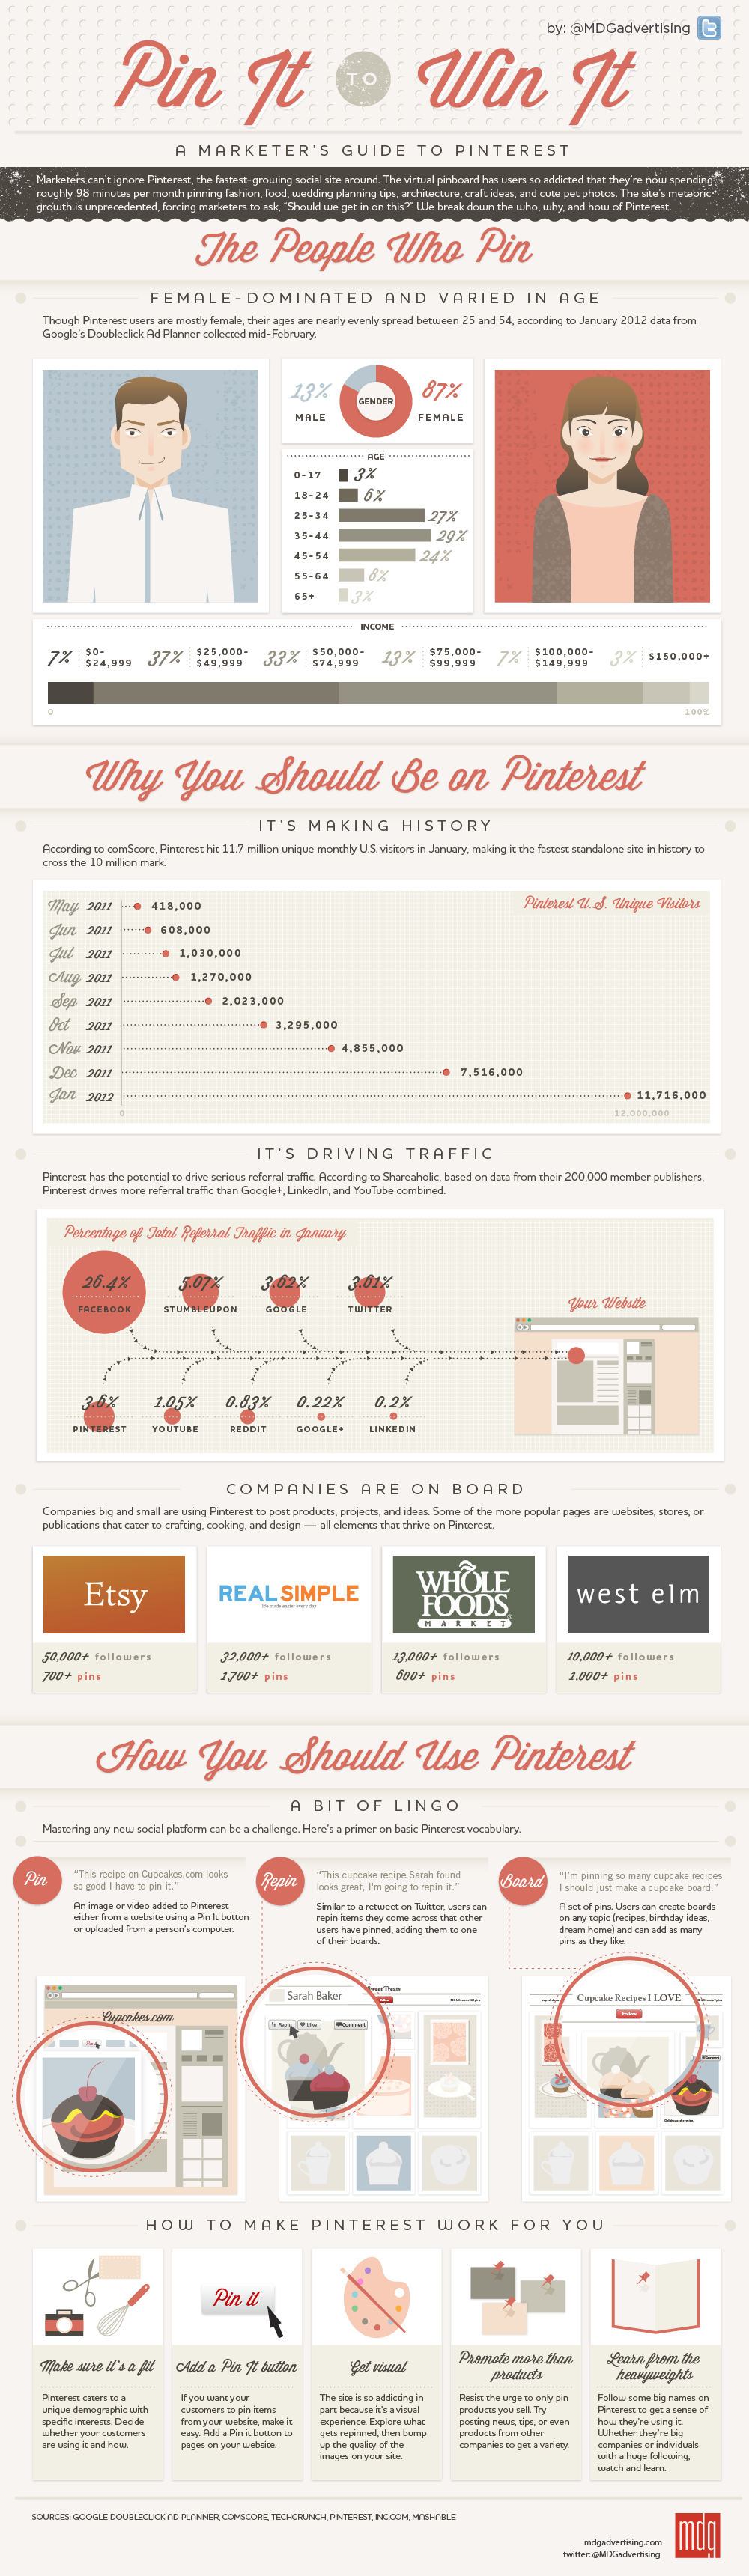 Marketer's Guide To Pinterest: Pin It To Win It [infographic by MDG Advertising]